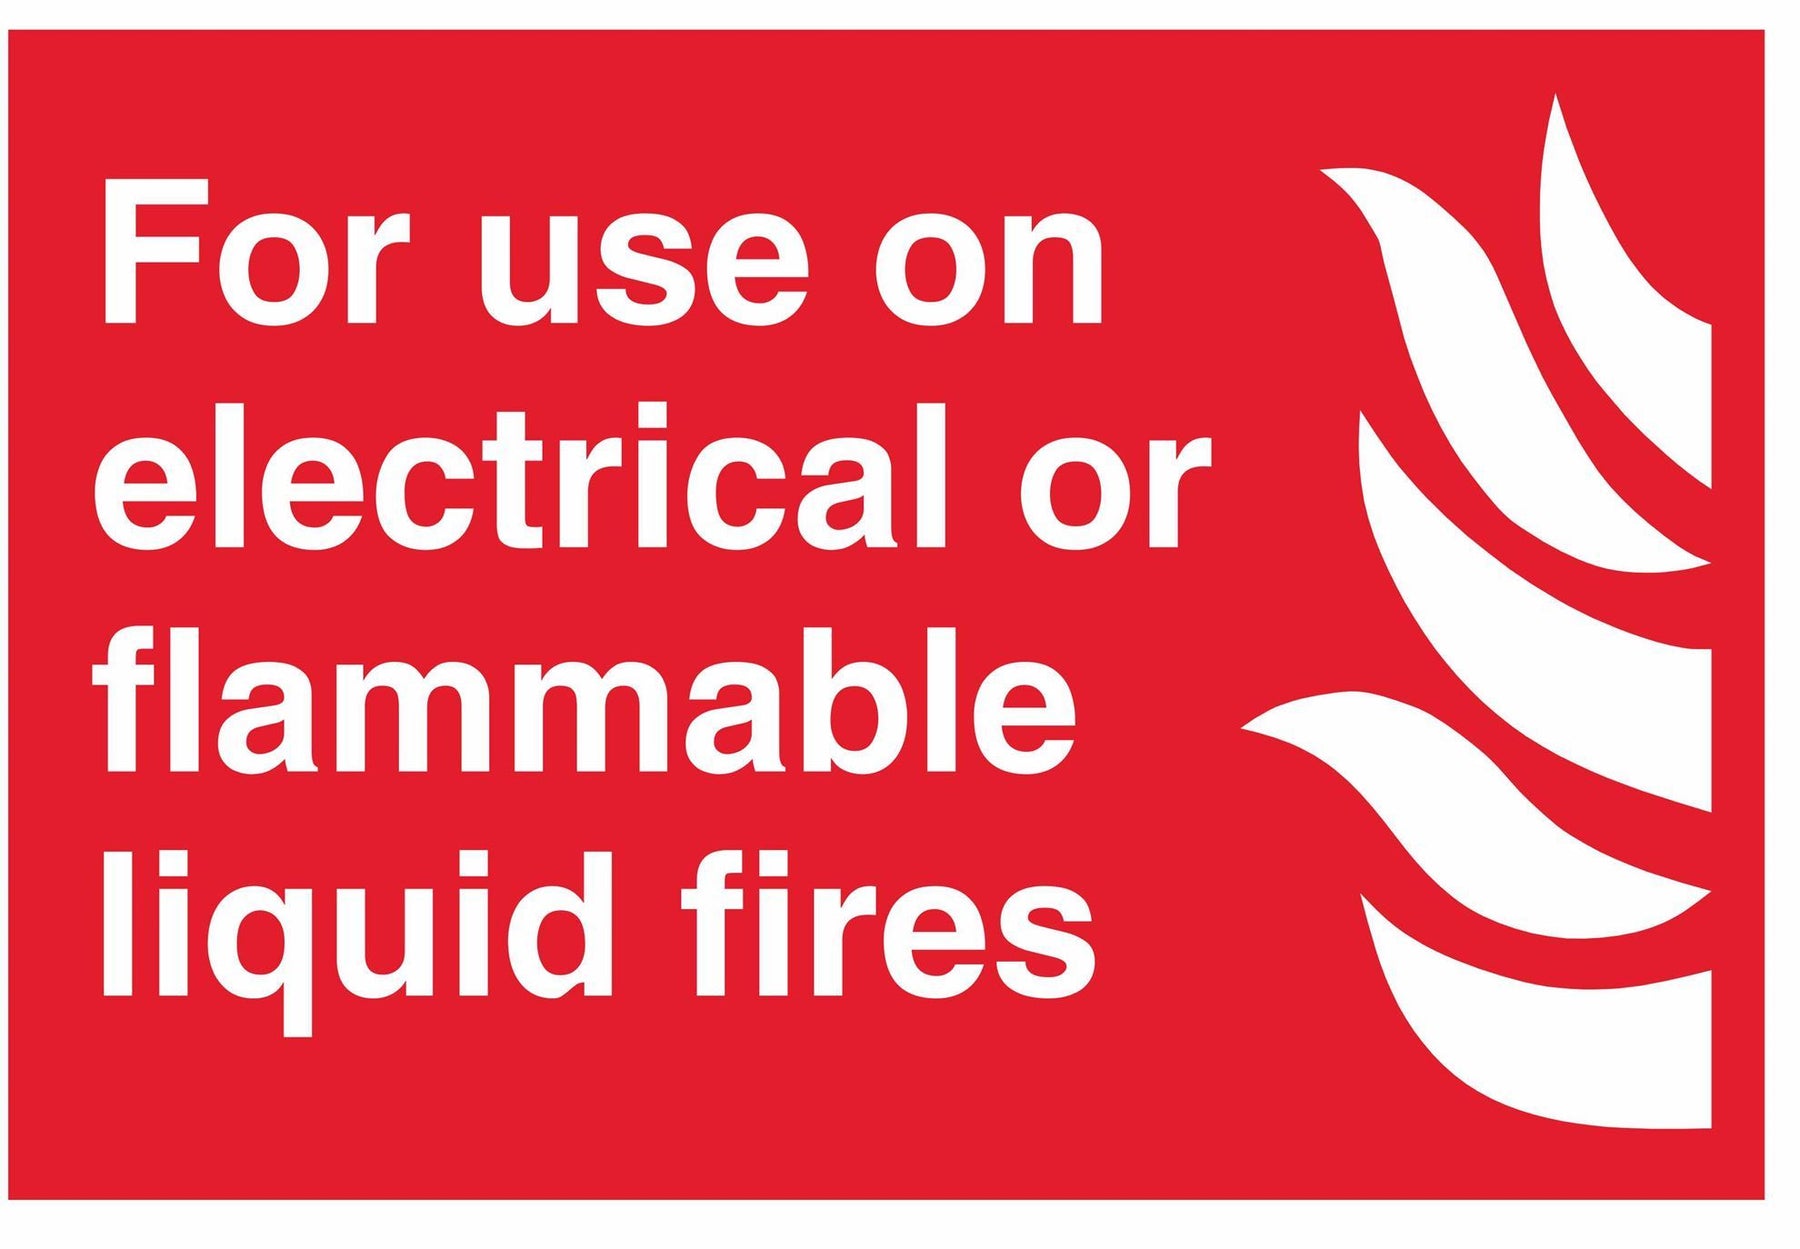 For use on electrical or flammable liquid fires